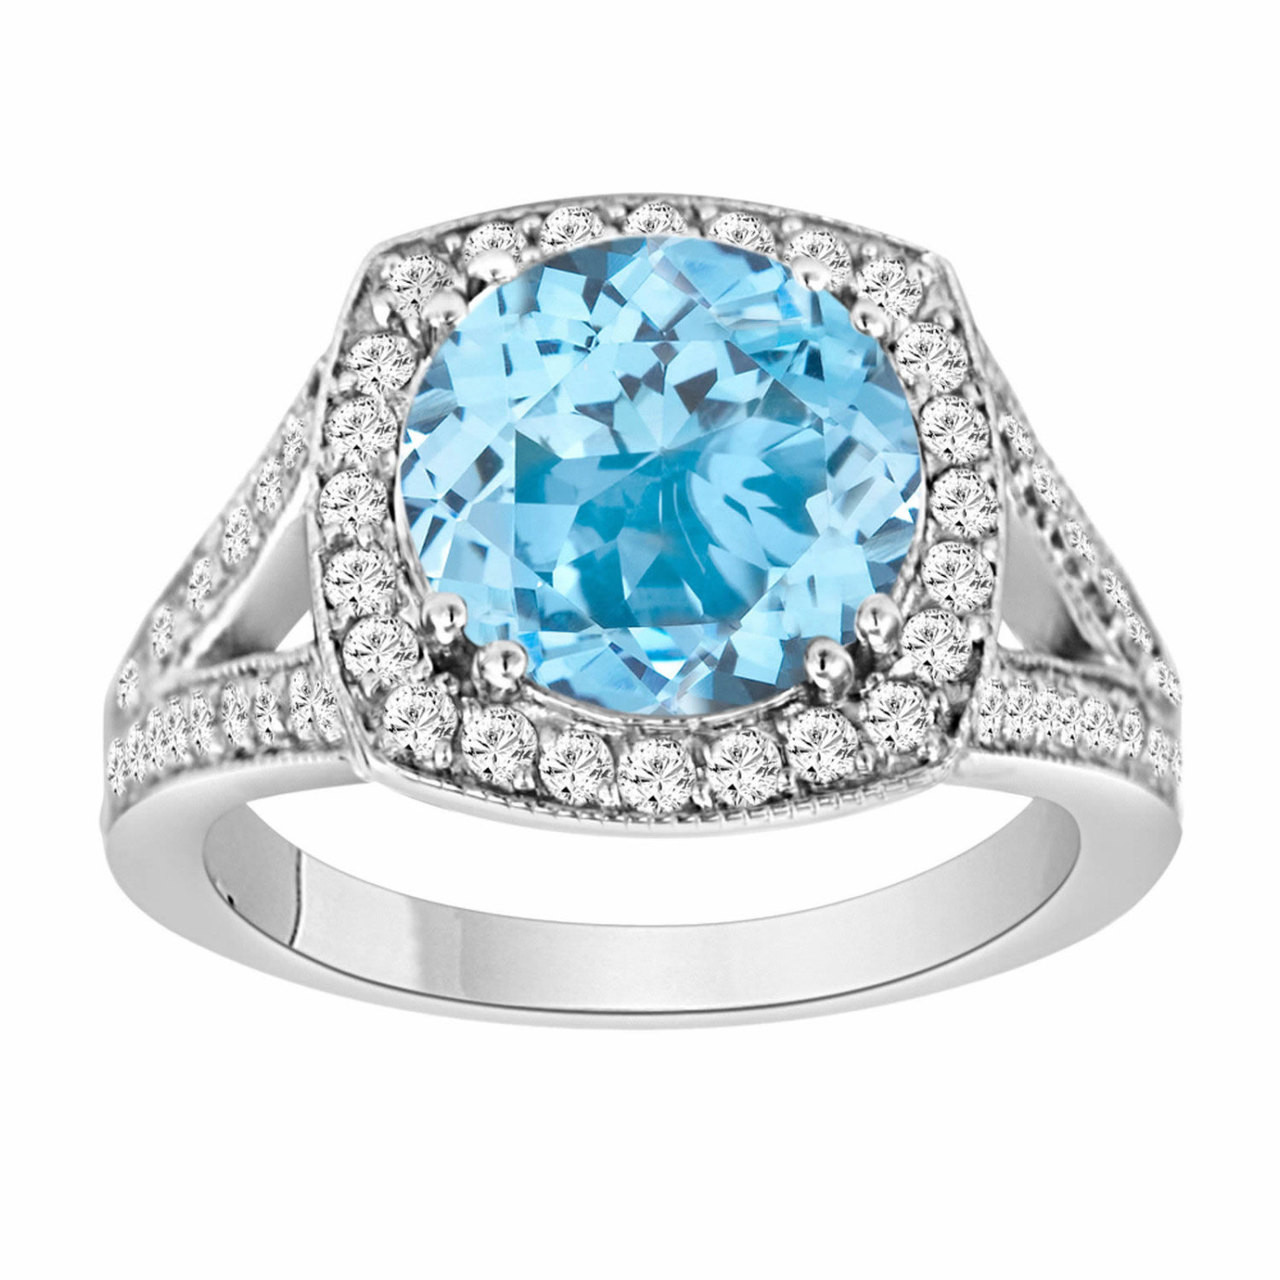 3 Carat Blue Topaz Engagement Ring, Blue Topaz and